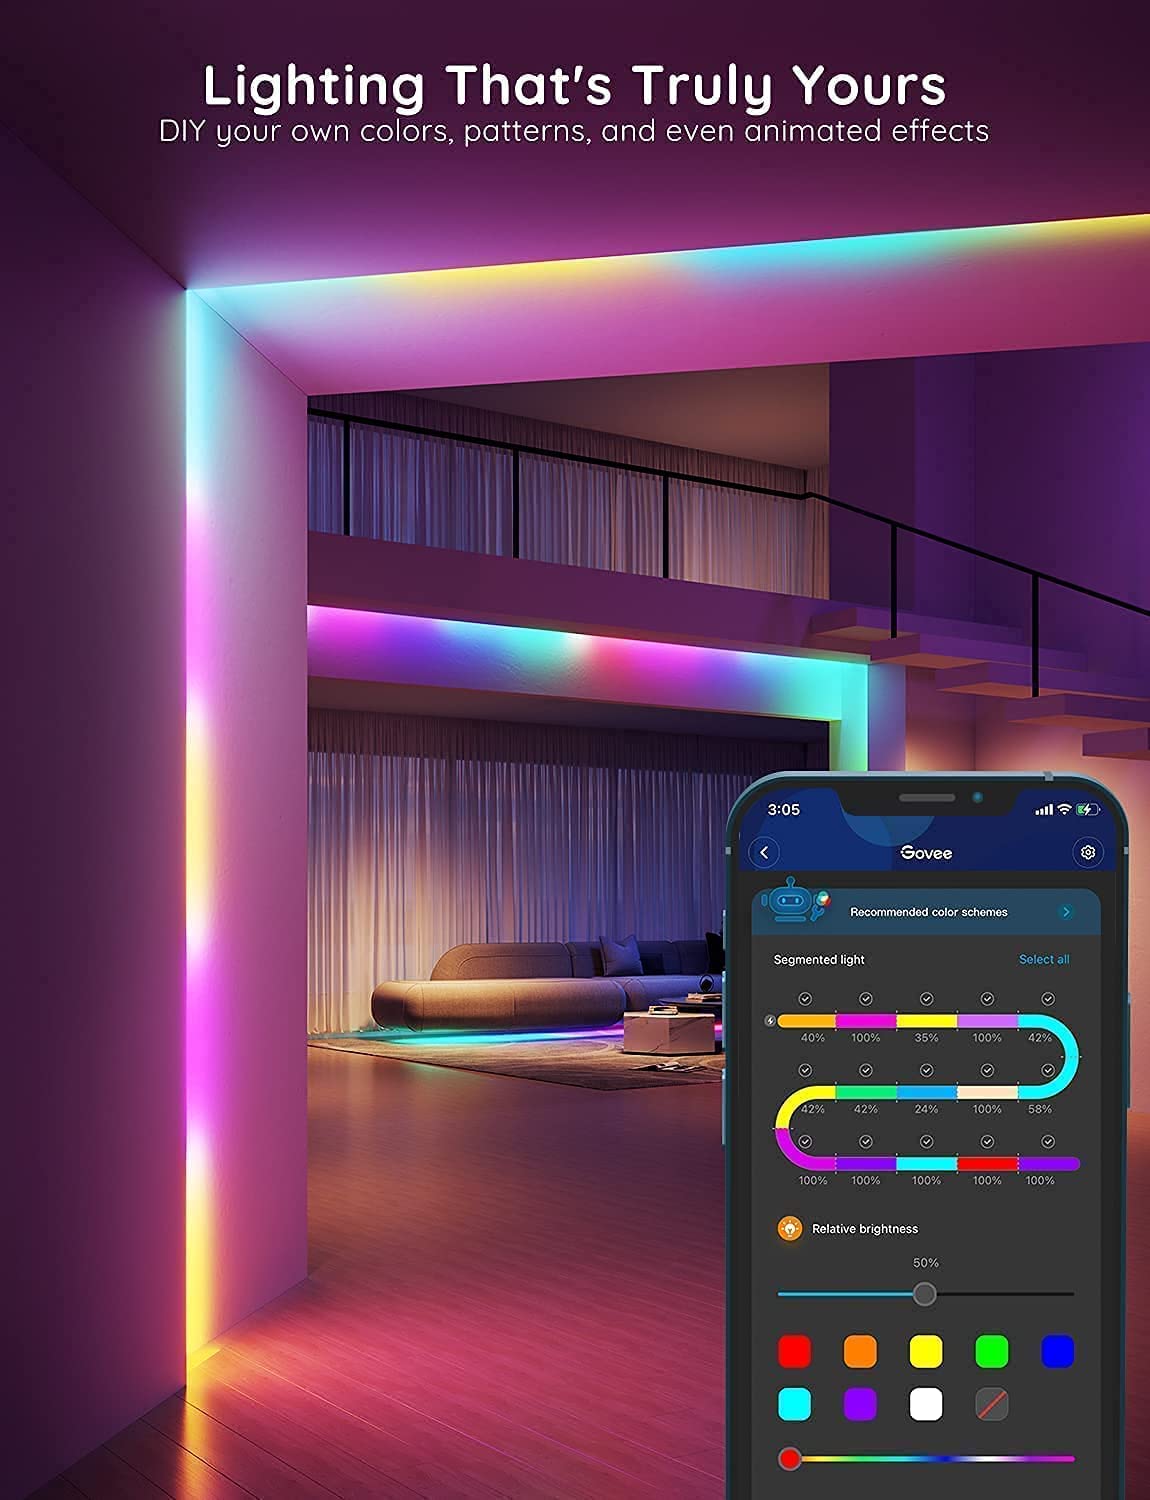  Govee Smart LED Strip Lights for Bedroom, 32.8ft WiFi LED Strip  Lighting Work with Alexa Google Assistant, 16 Million Colors with App  Control and Music Sync LED Lights for Christmas, 2